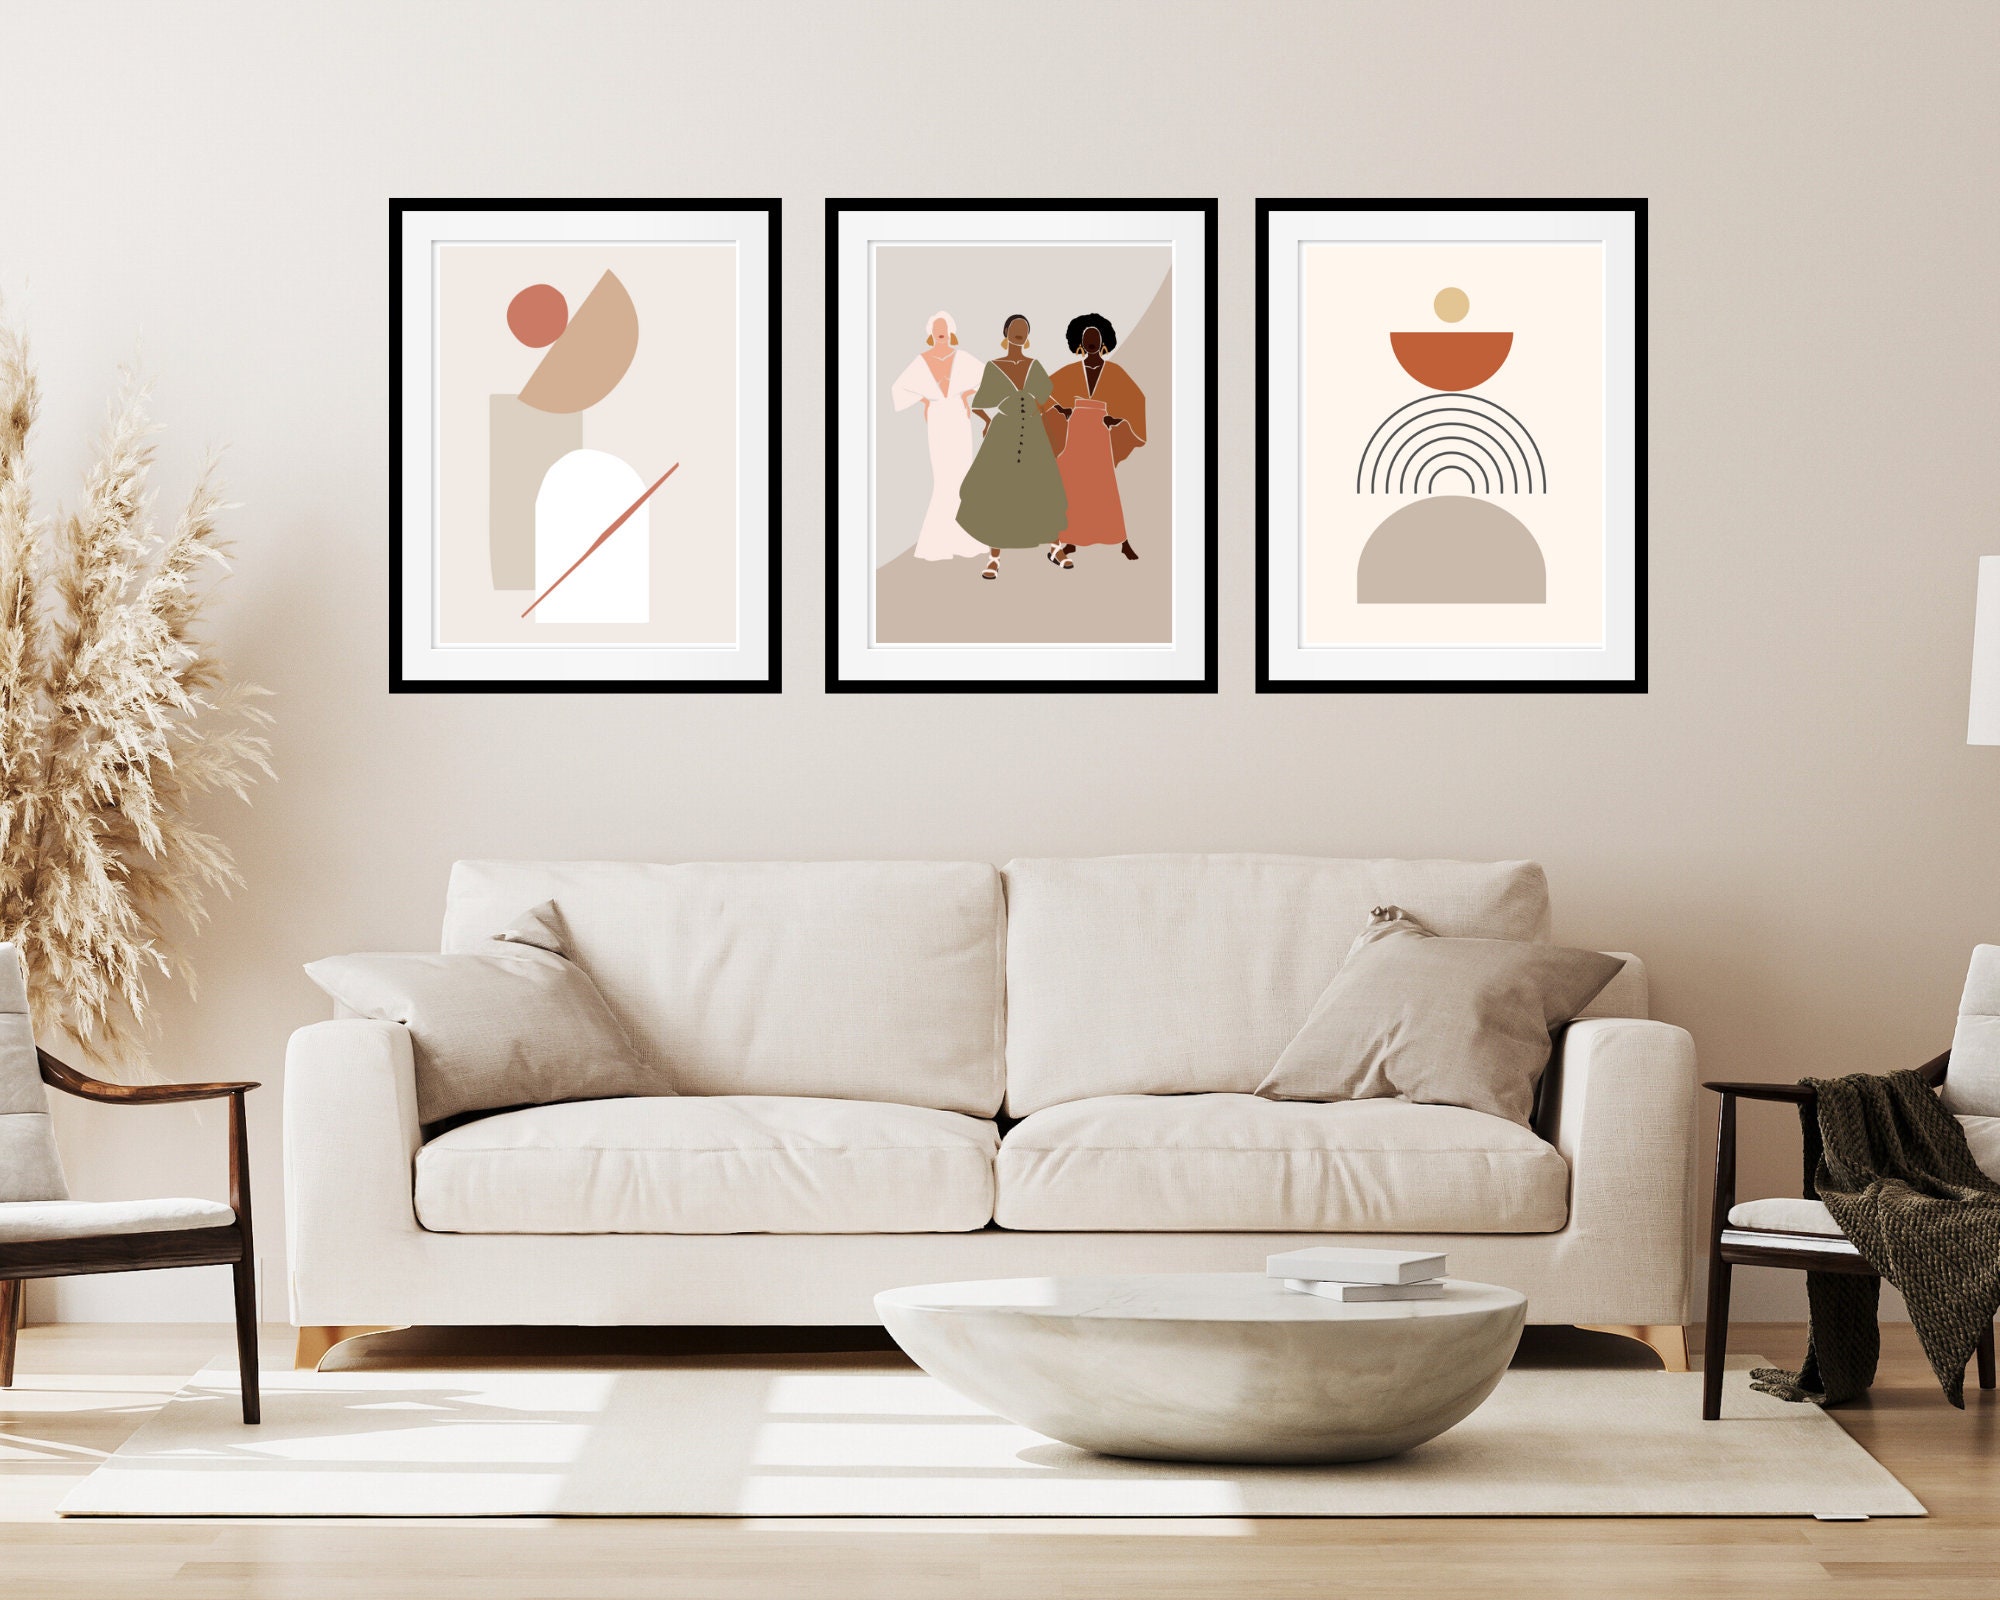 Abstract Warm Tone Female Silhouette Relaxing Space Wall Art, Bronze Woman Body  Shape Office Restroom Artwork Poster Print 